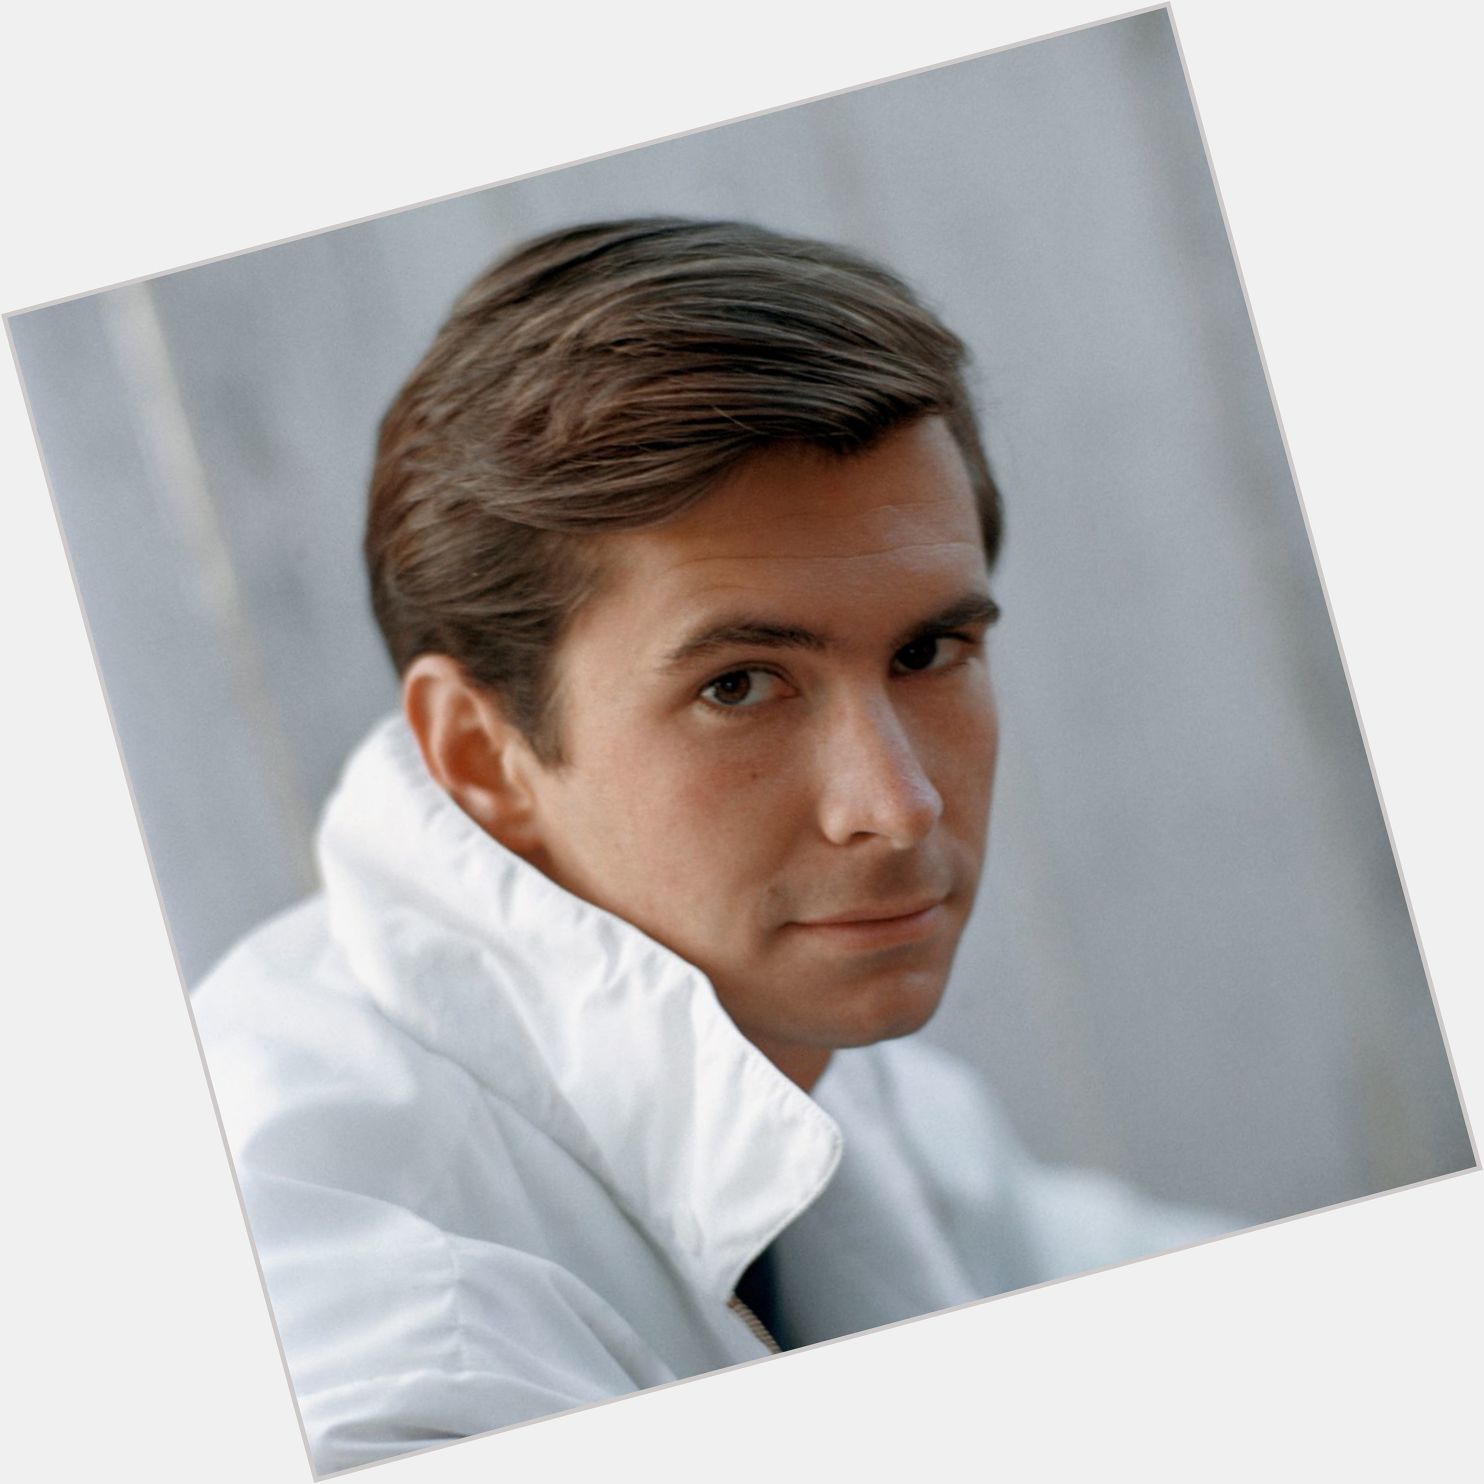 Happy birthday to the late Anthony Perkins of Psycho fame.  